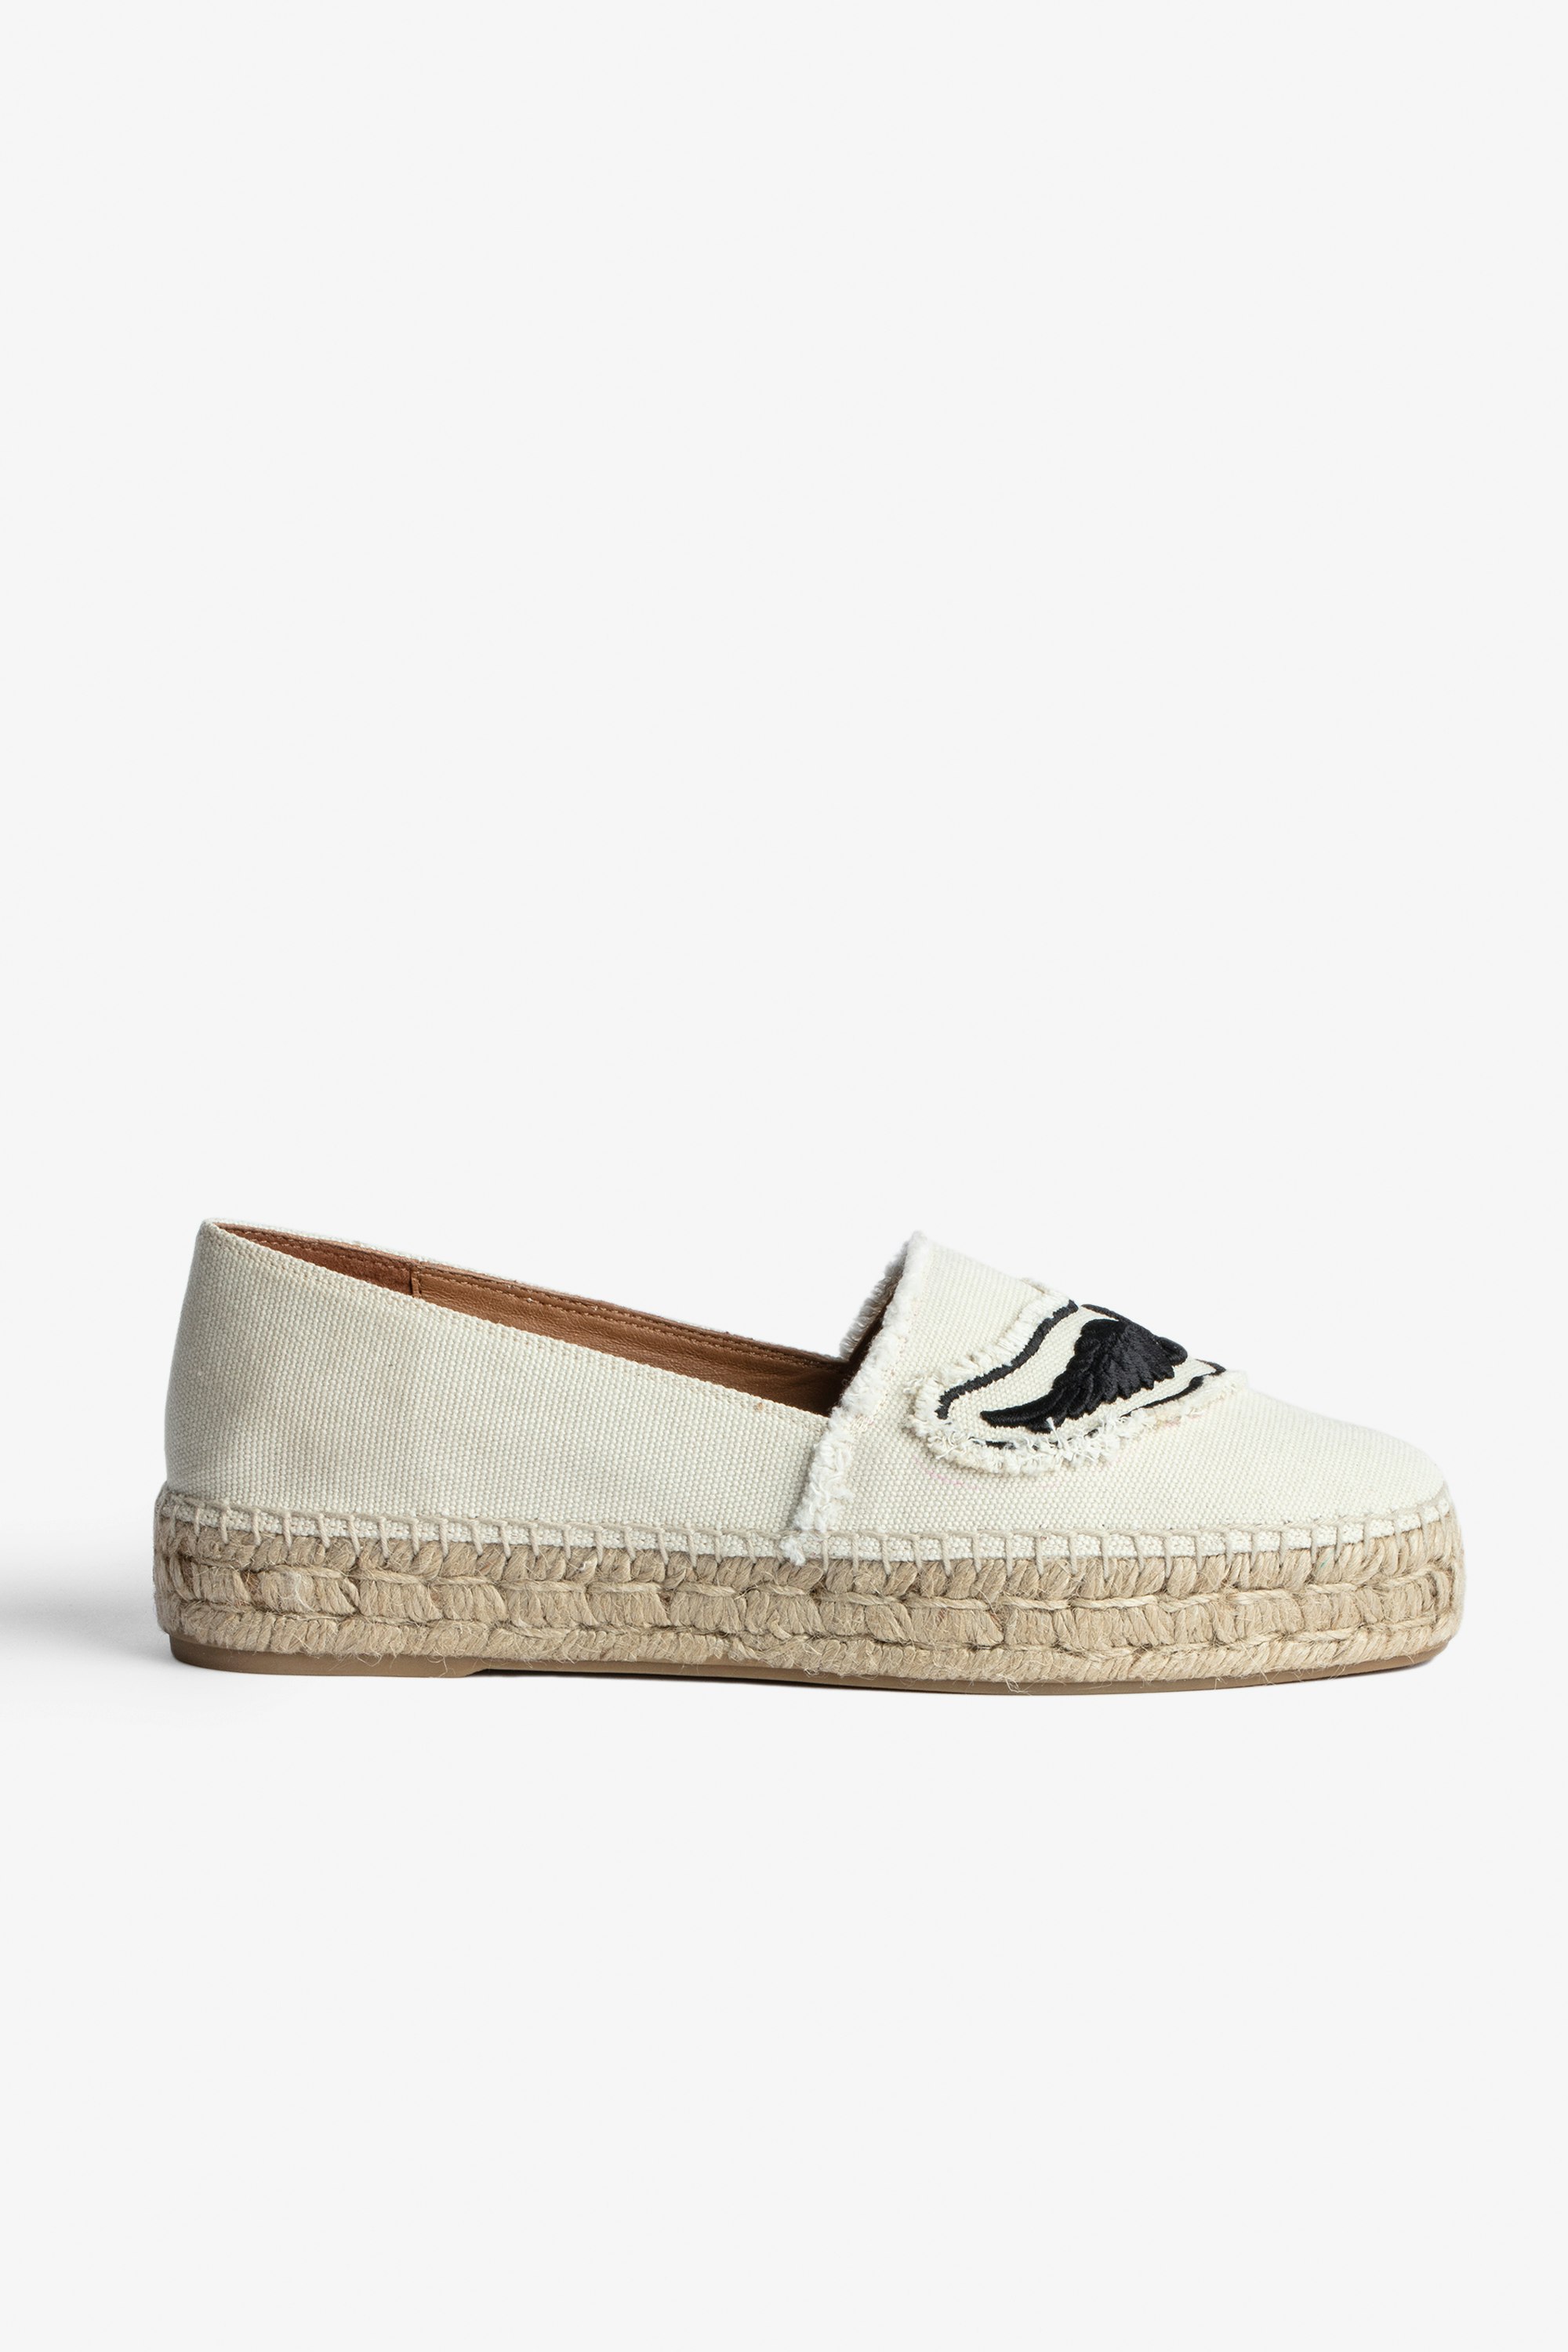 Zadig Espadrilles Women's off-white cotton canvas espadrilles with wings